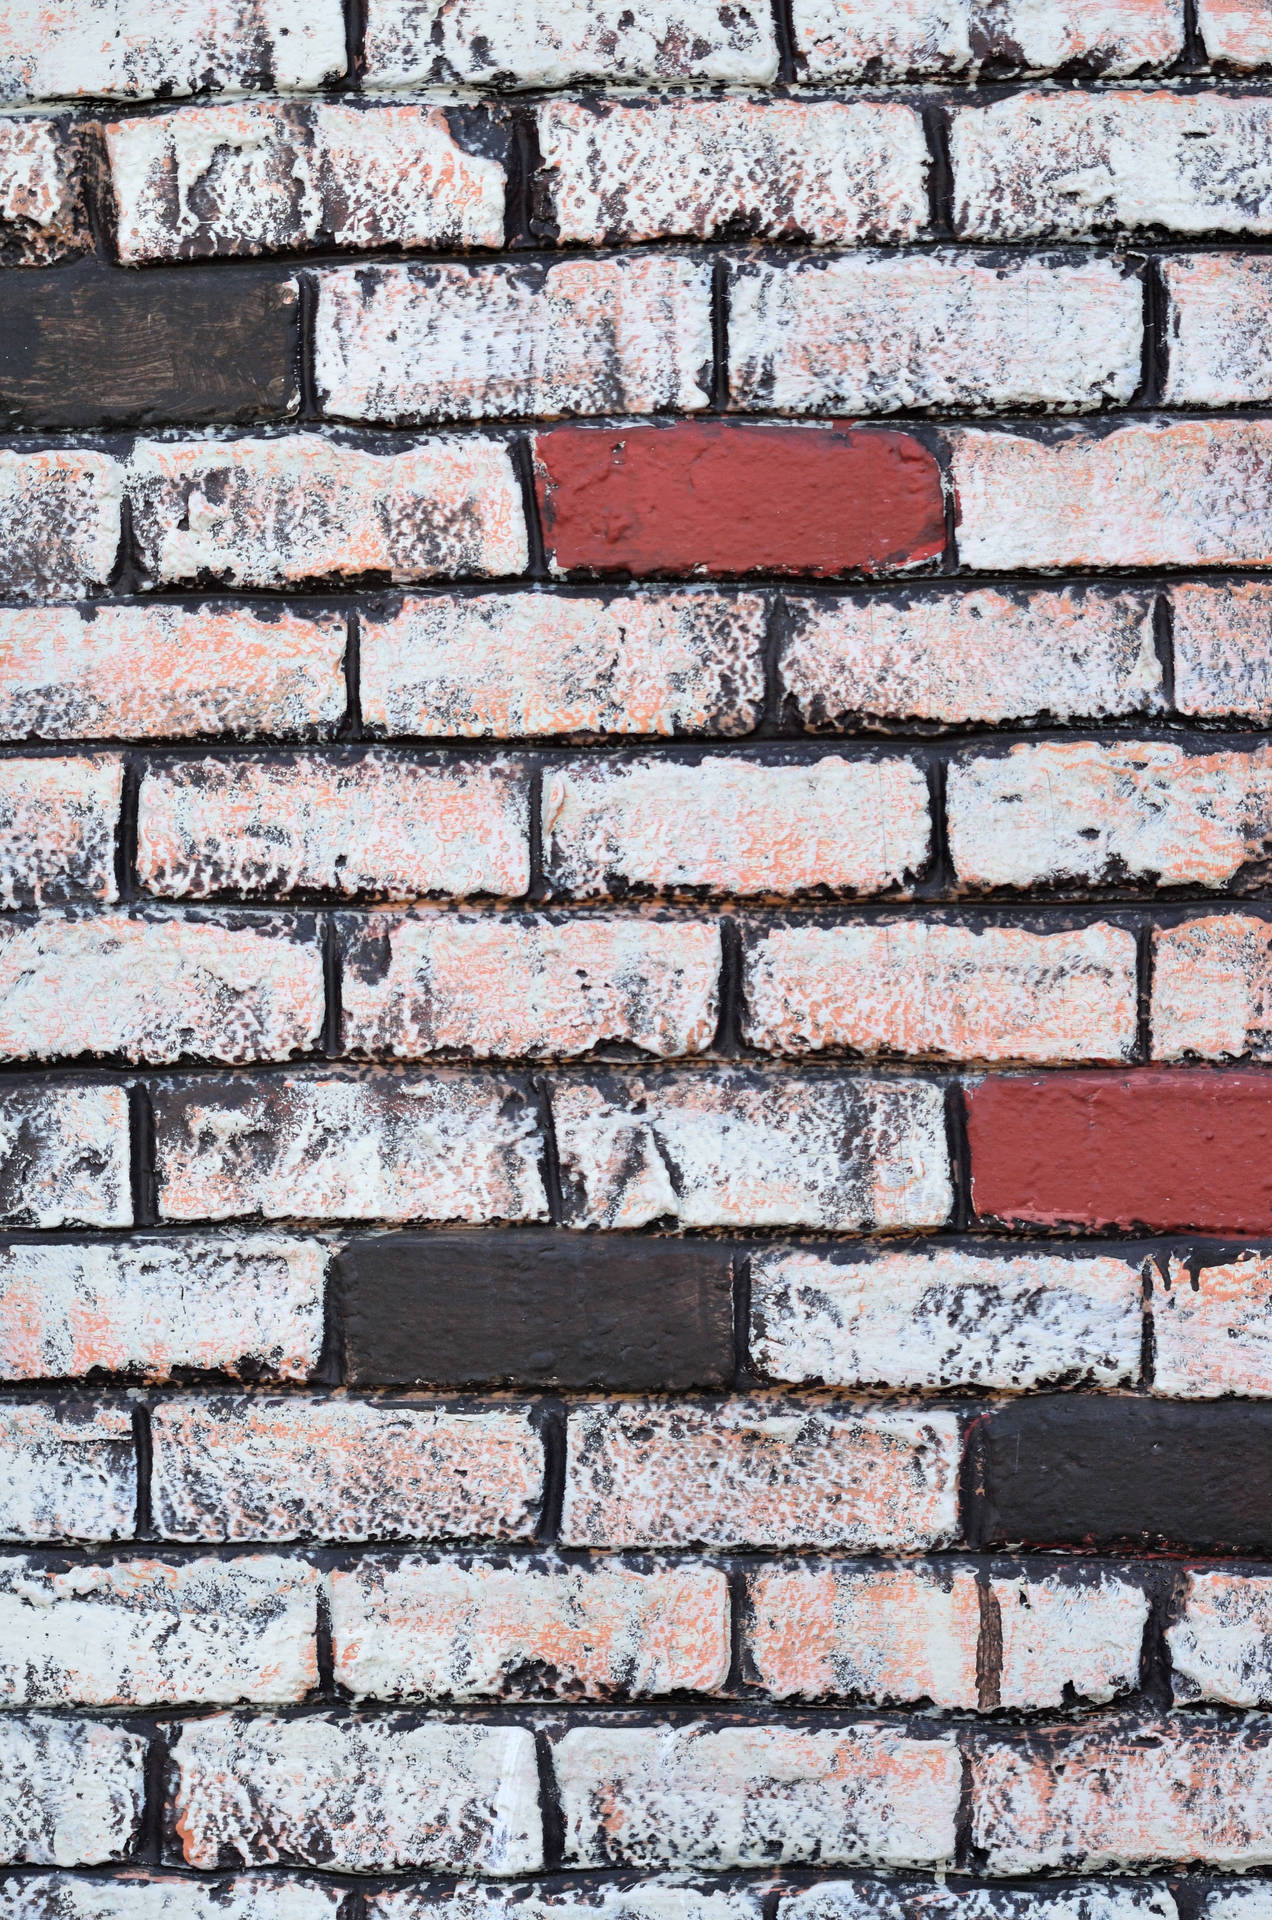 "Artistic Expressions Through a Colorfully Painted Brick Wall" Wallpaper